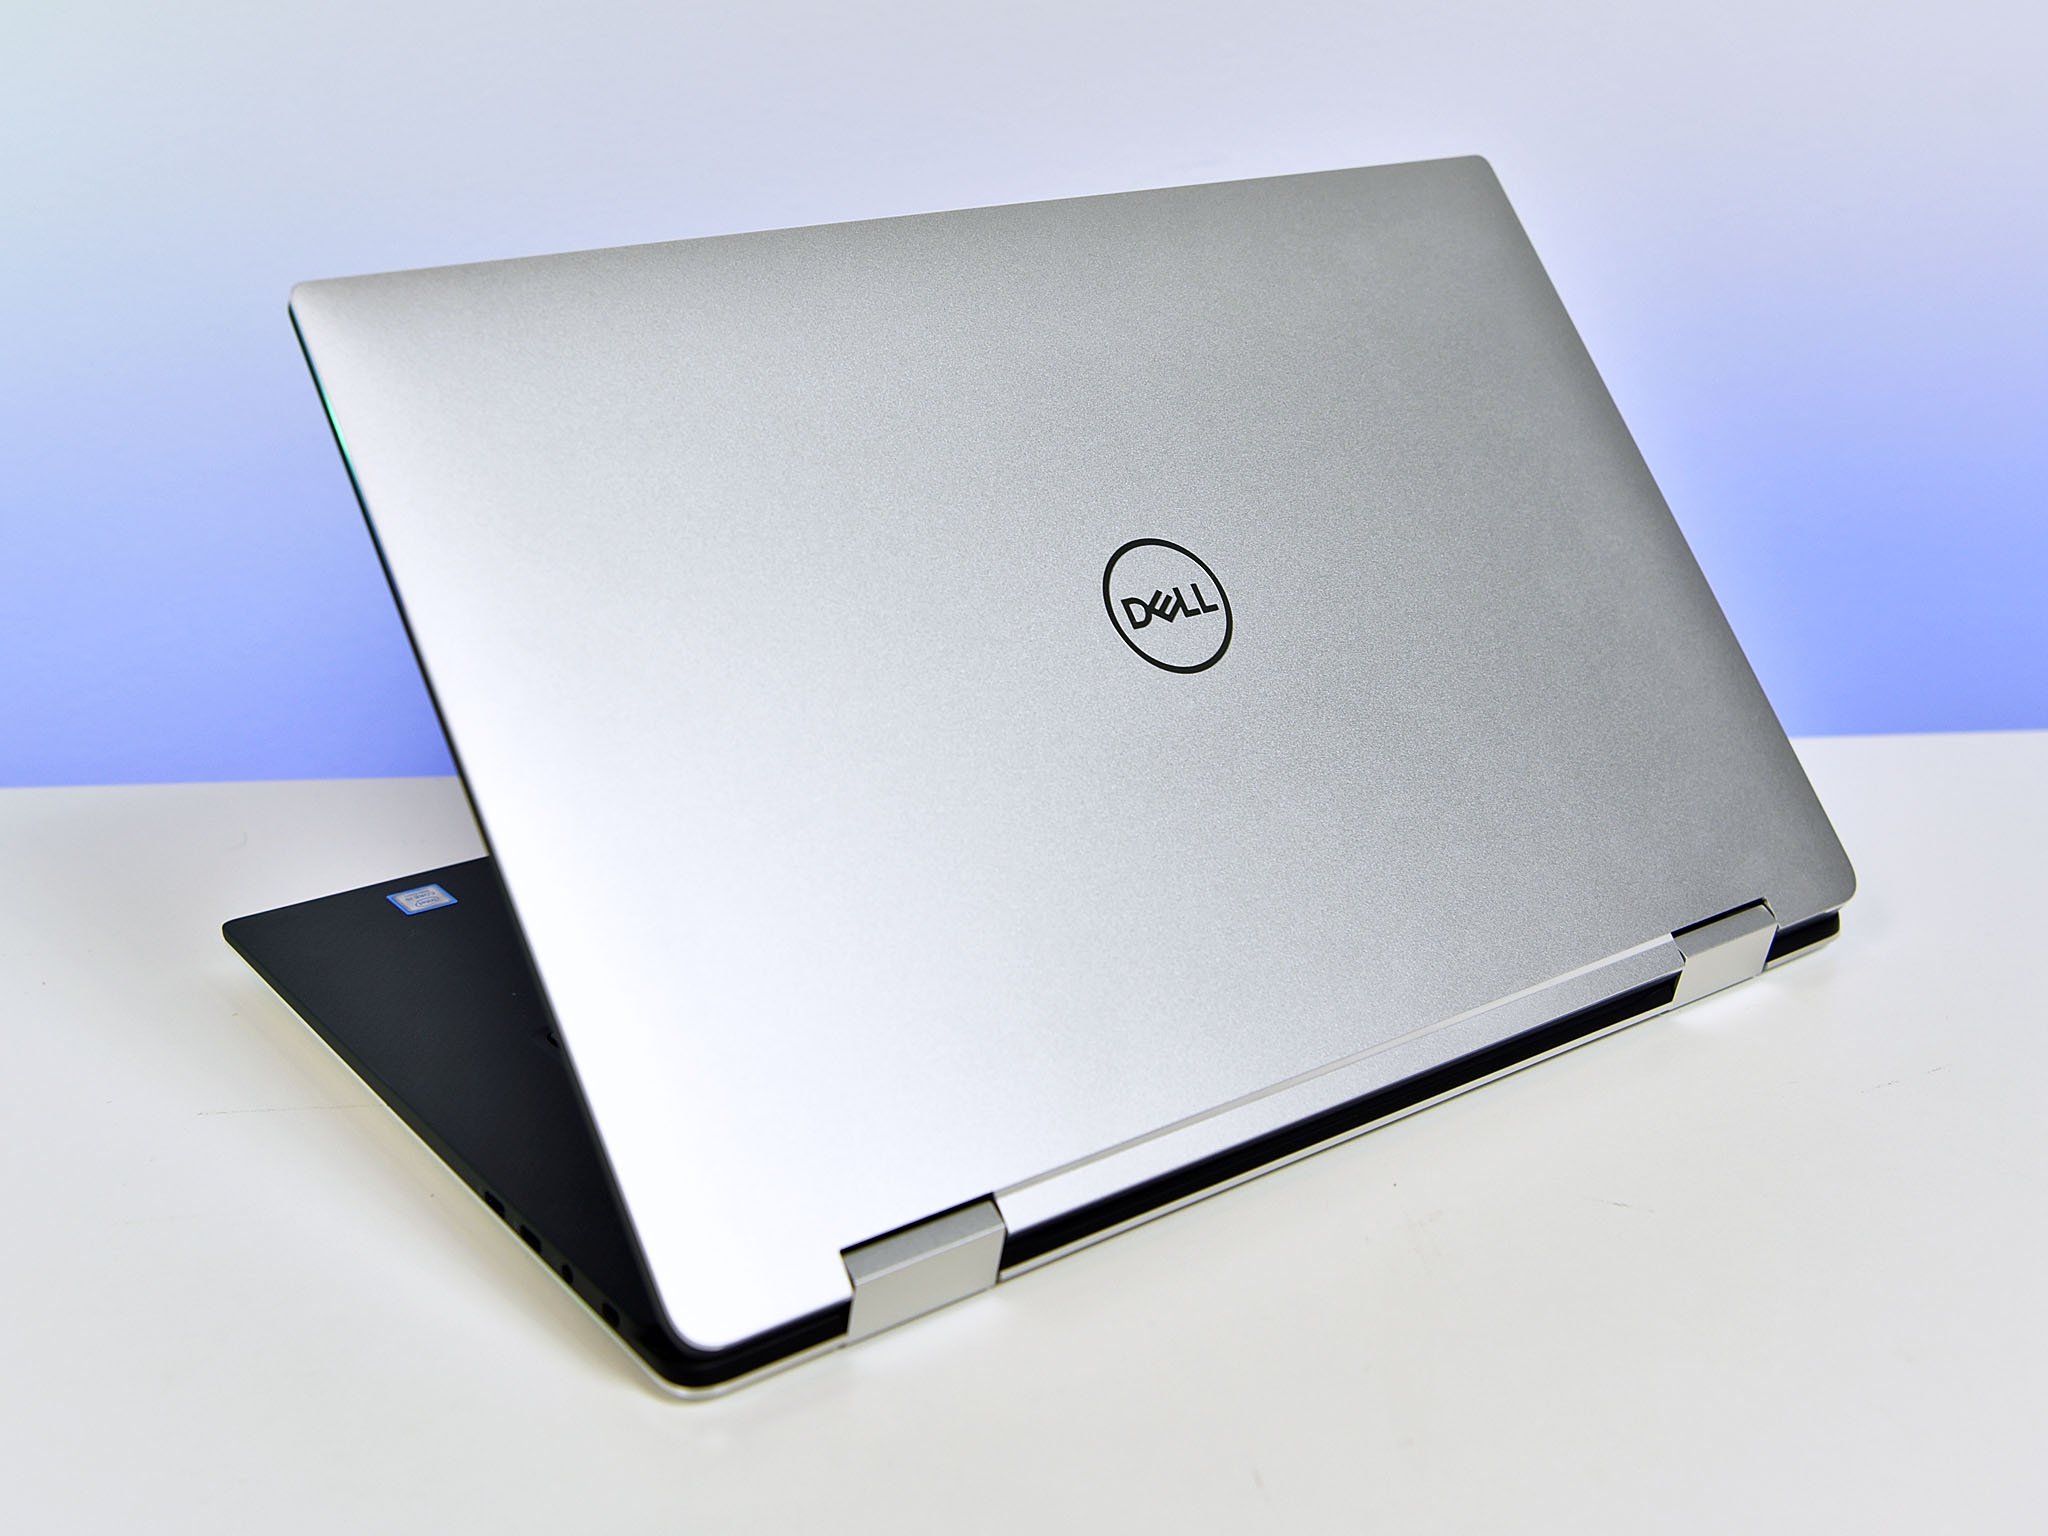 Dell XPS 15 vs. XPS 15 2-in-1